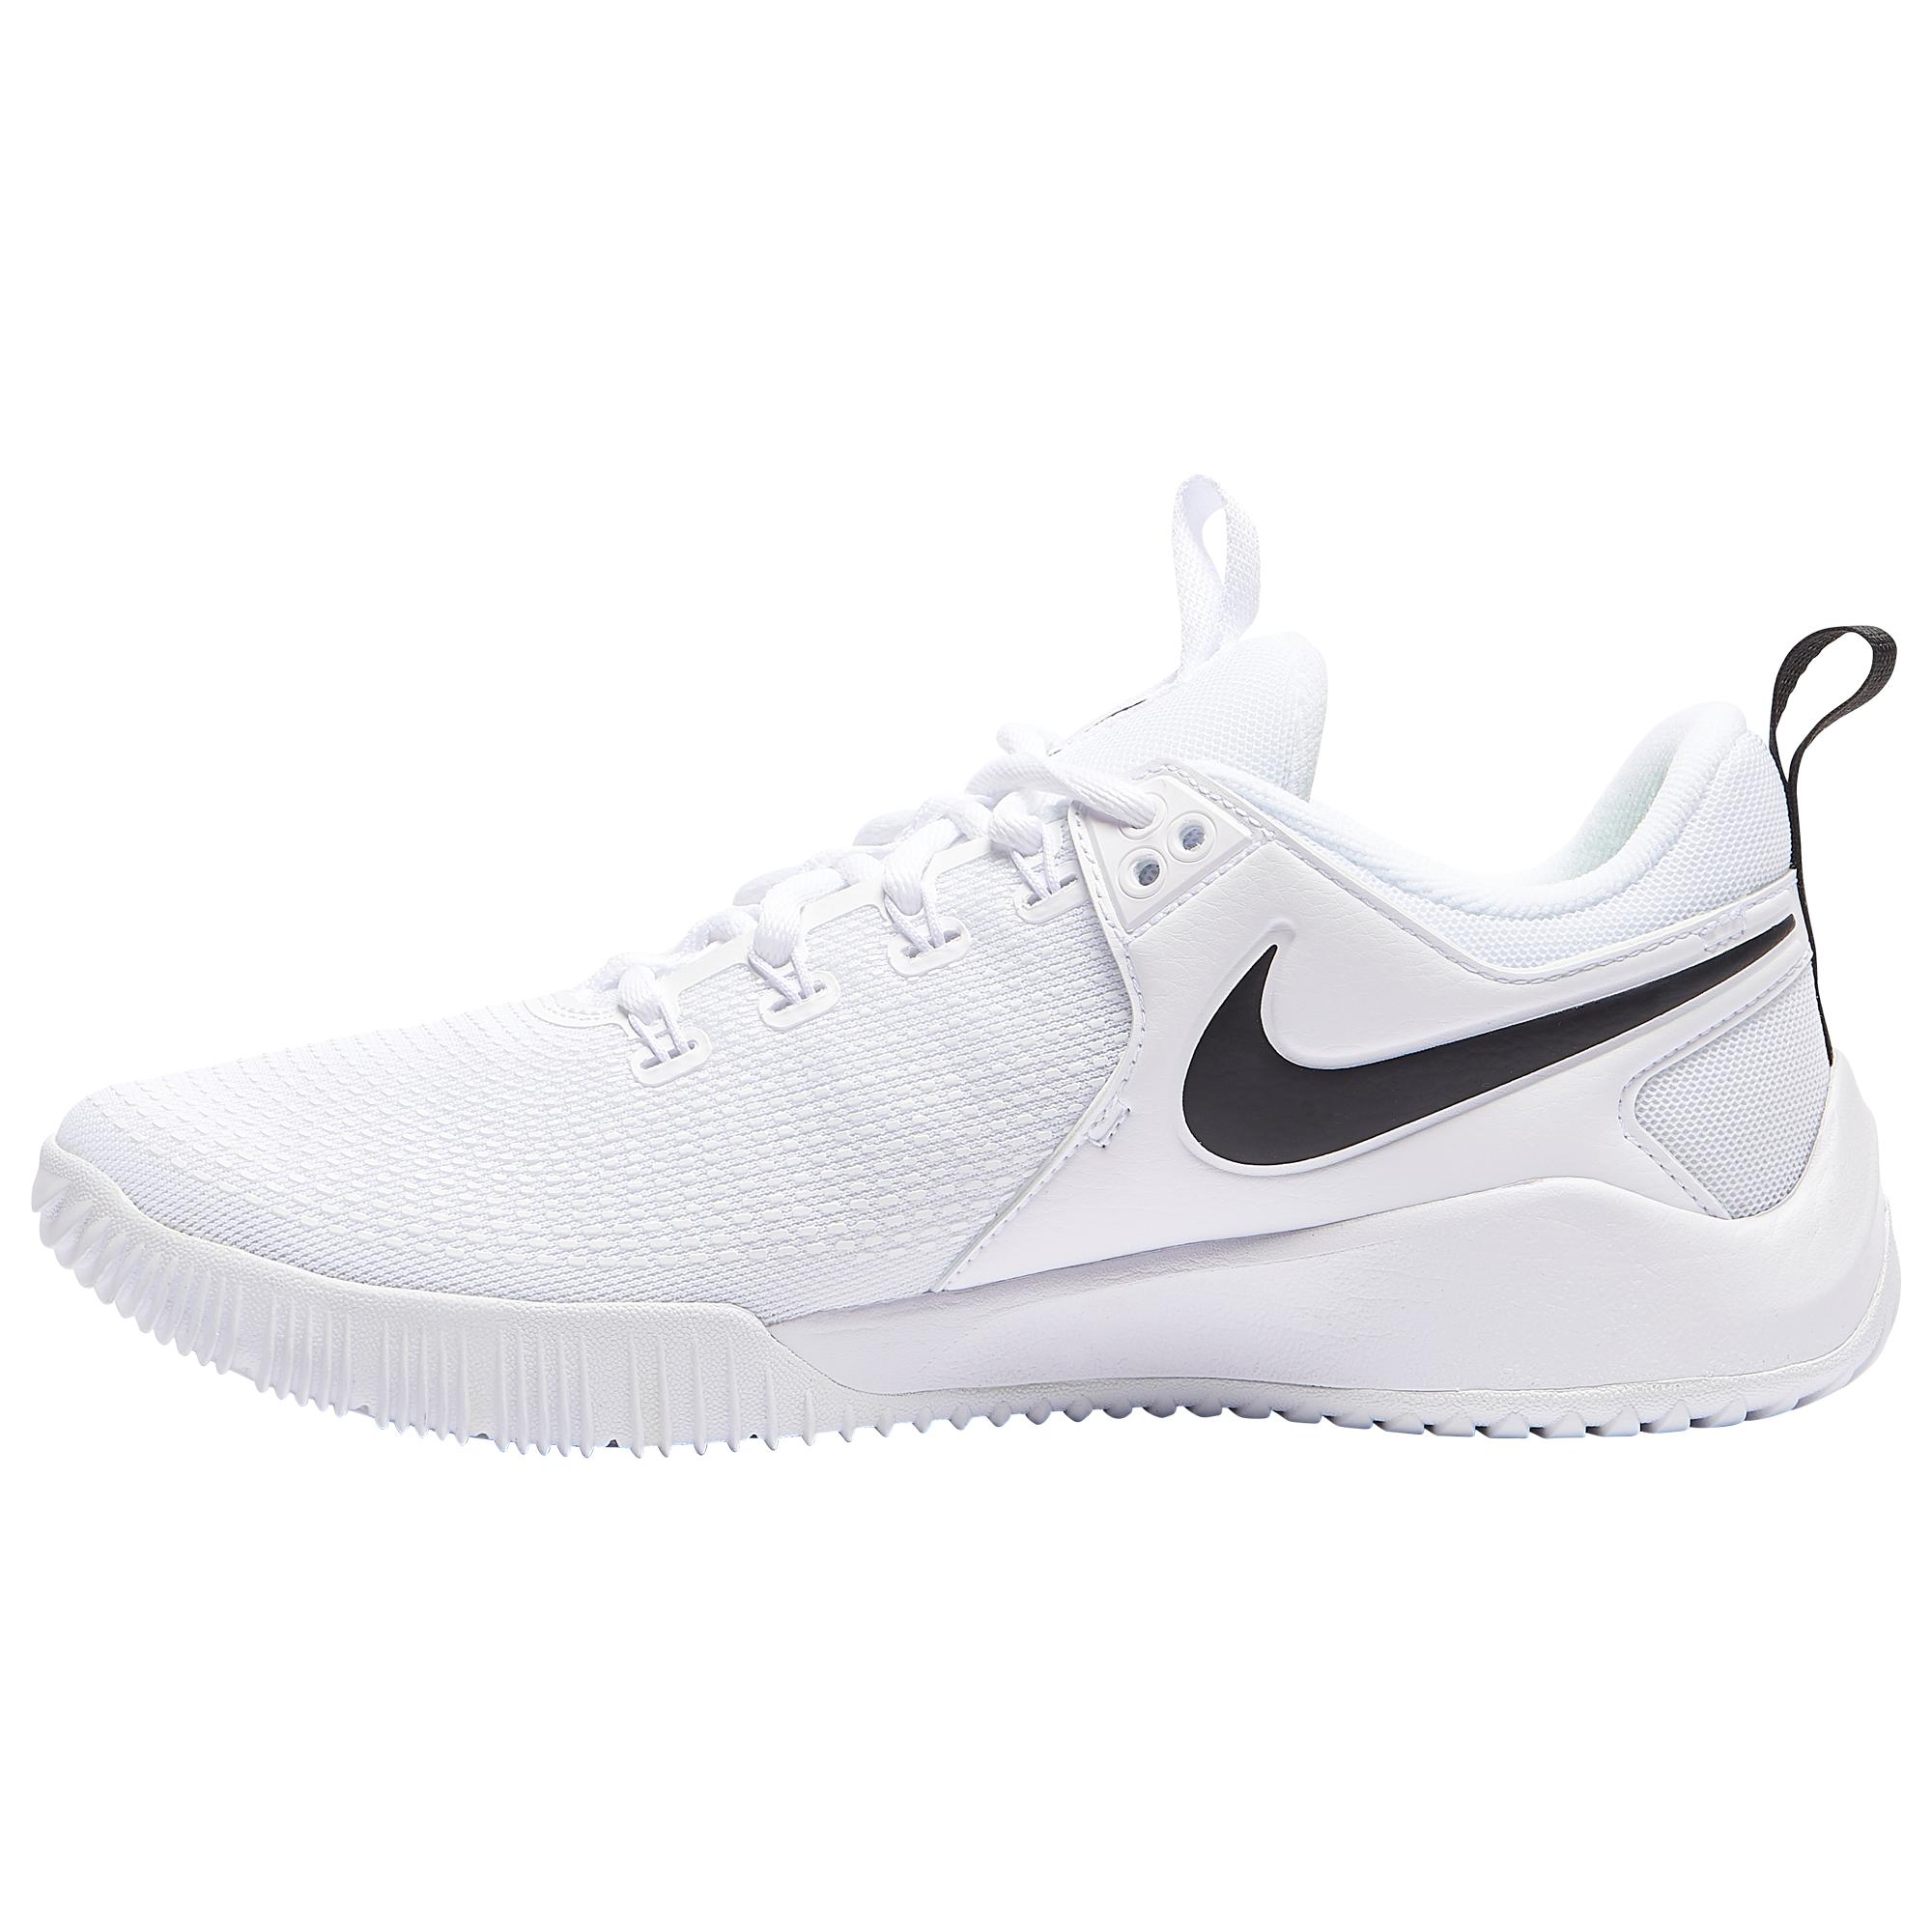 Nike Rubber Zoom Hyperace 2 - Volleyball Shoes in White/Black (White) | Lyst